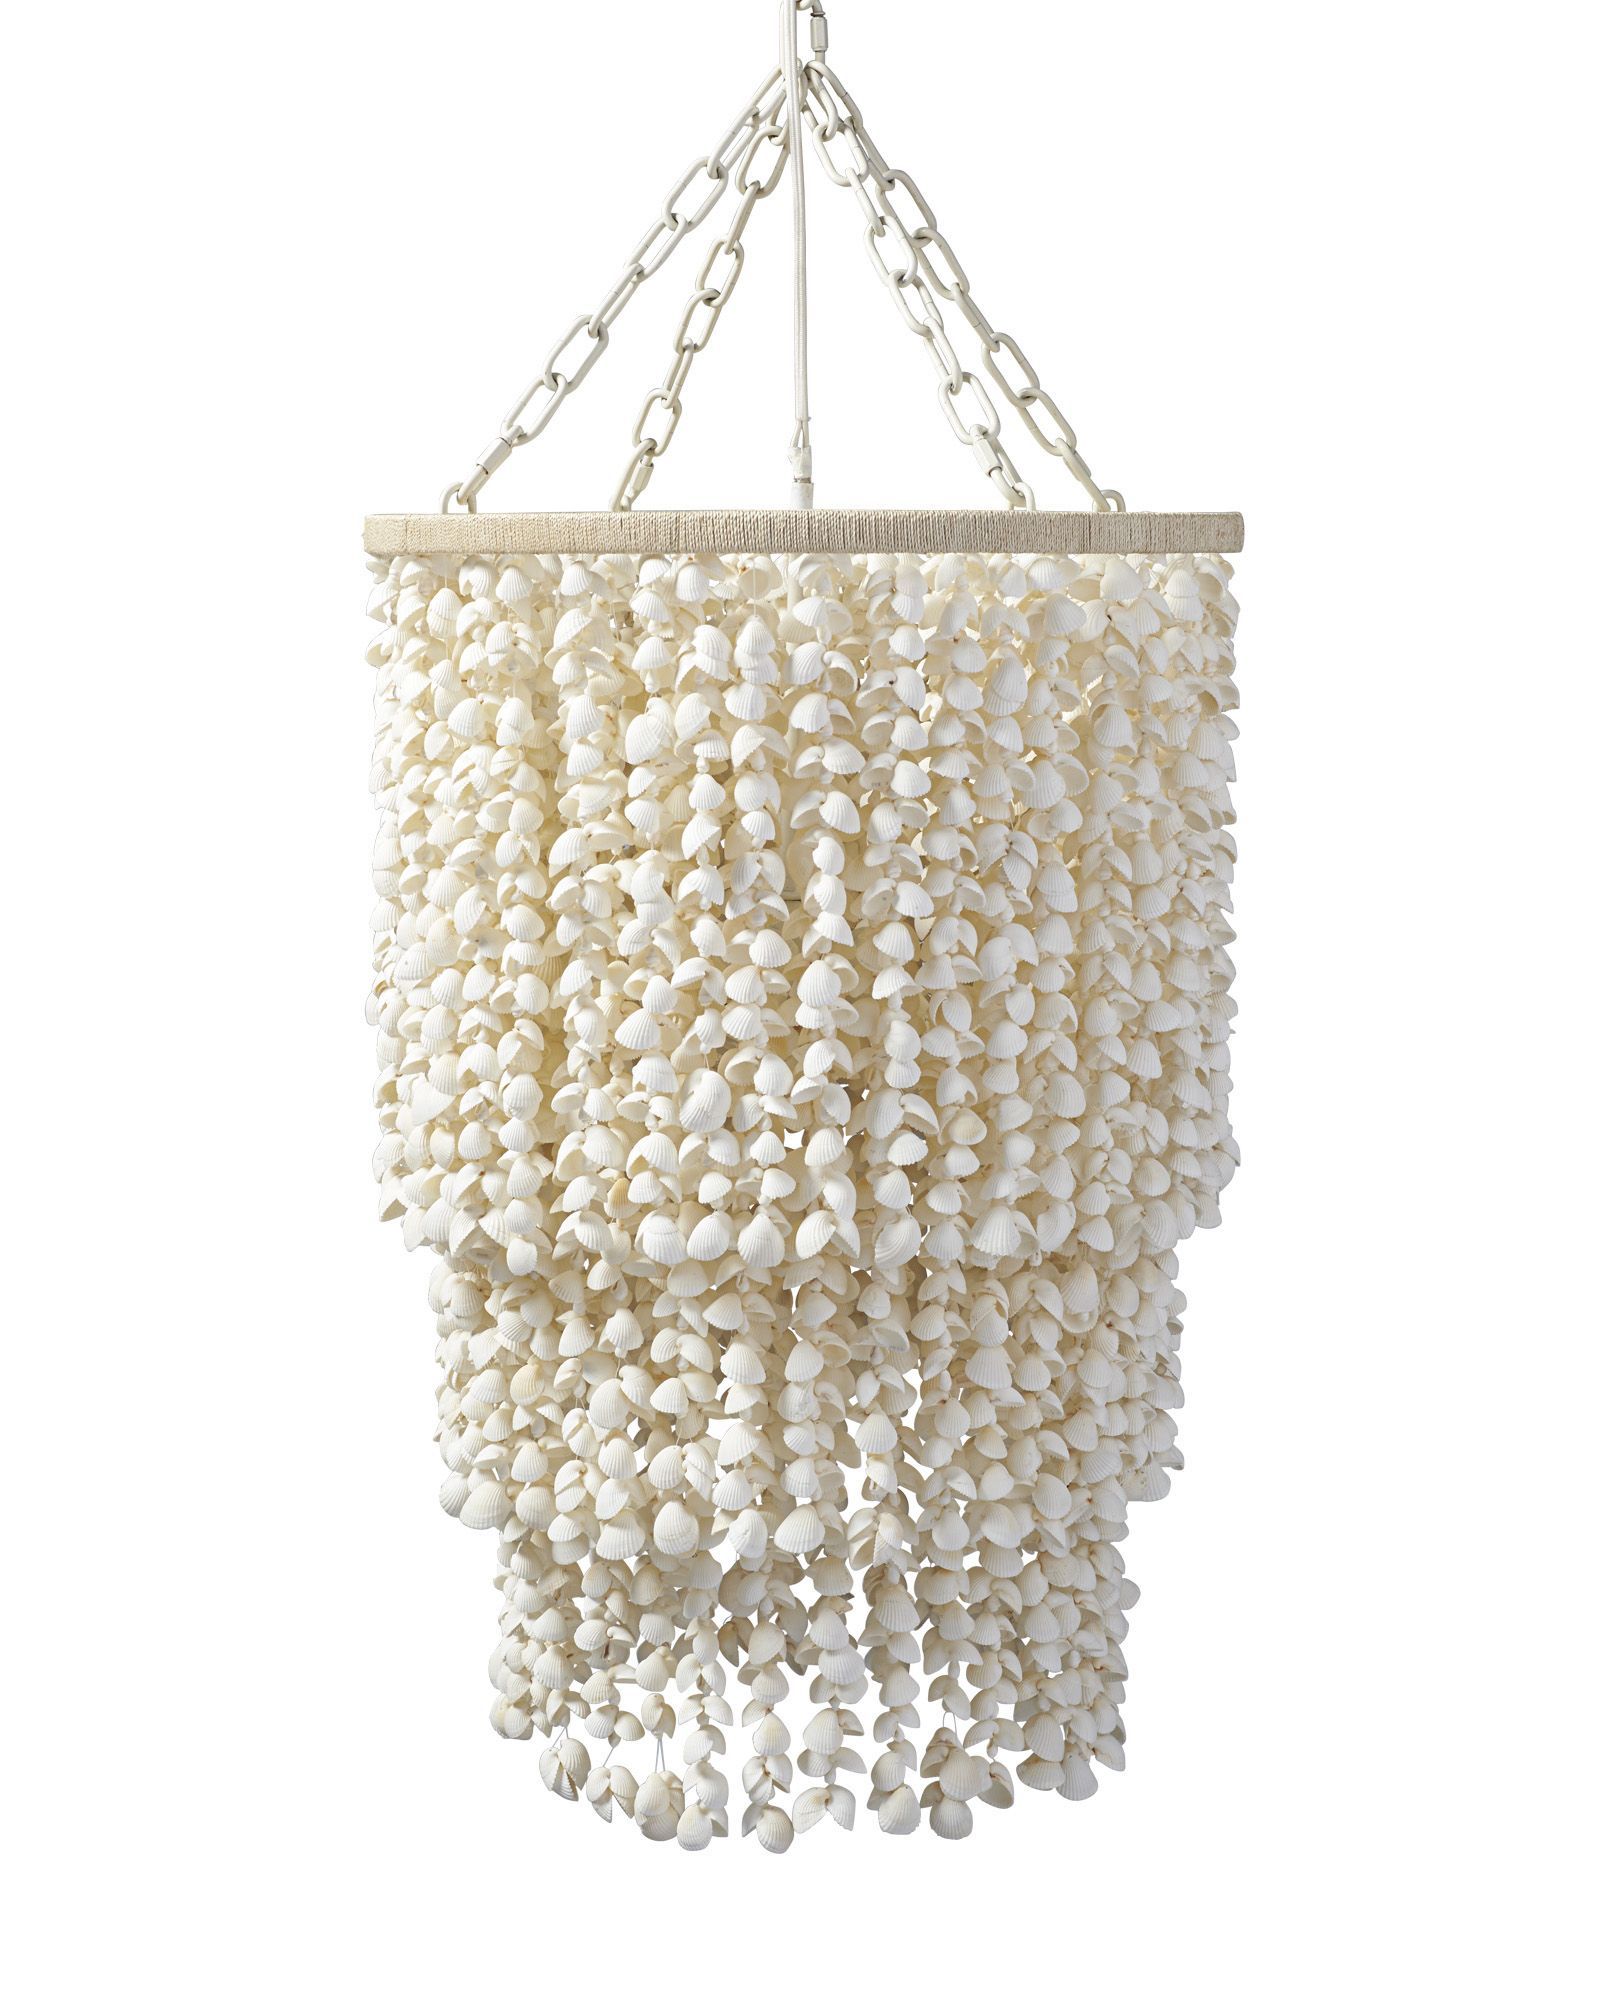 Serena & Lily Aptos Shell Chandelier | Lighting In 2019 With Lyon 3 Light Unique / Statement Chandeliers (View 23 of 30)